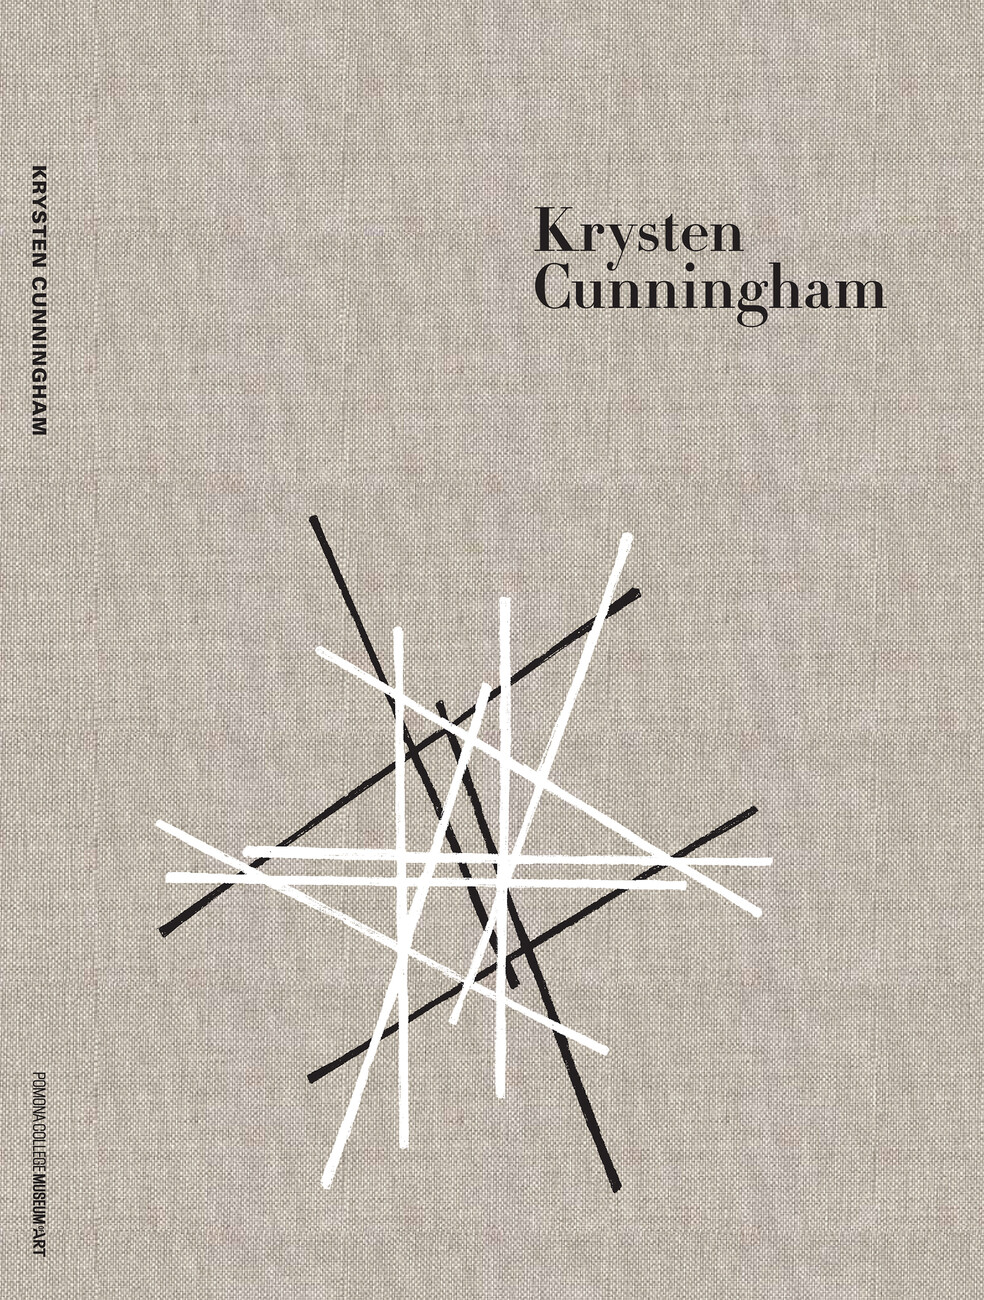 Front cover of Krysten Cunningham's exhibition catalogue with black and white lines against brown background